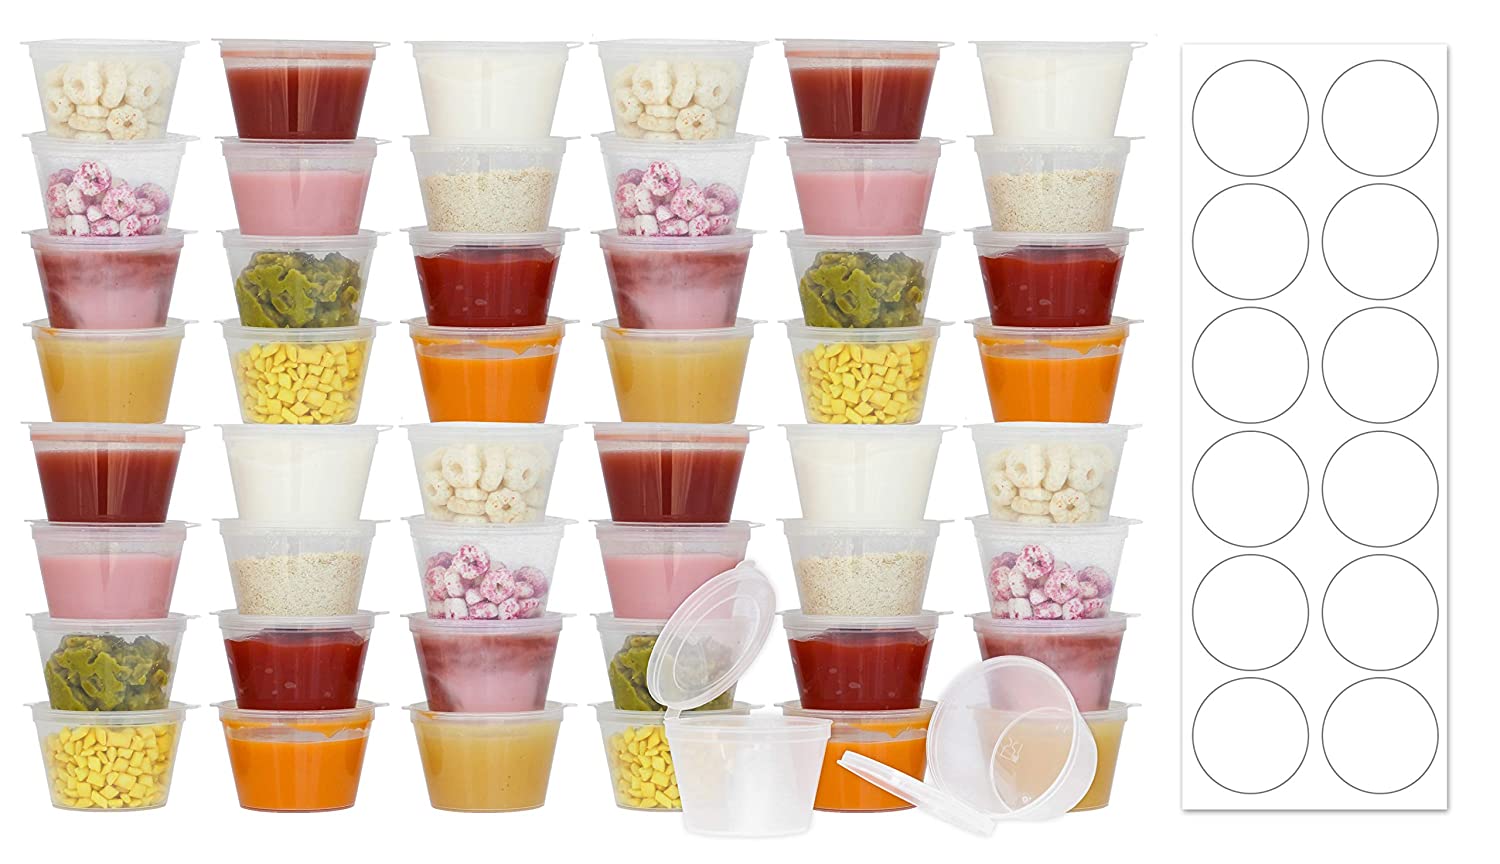 50 Pack BPA-Free Baby Food Freezer Storage Containers Hinged Lids (3 oz) Labels | Leak-Proof | Travel Snack Cups | Store Homemade, Organic Purees | Freezer Dishwasher Safe